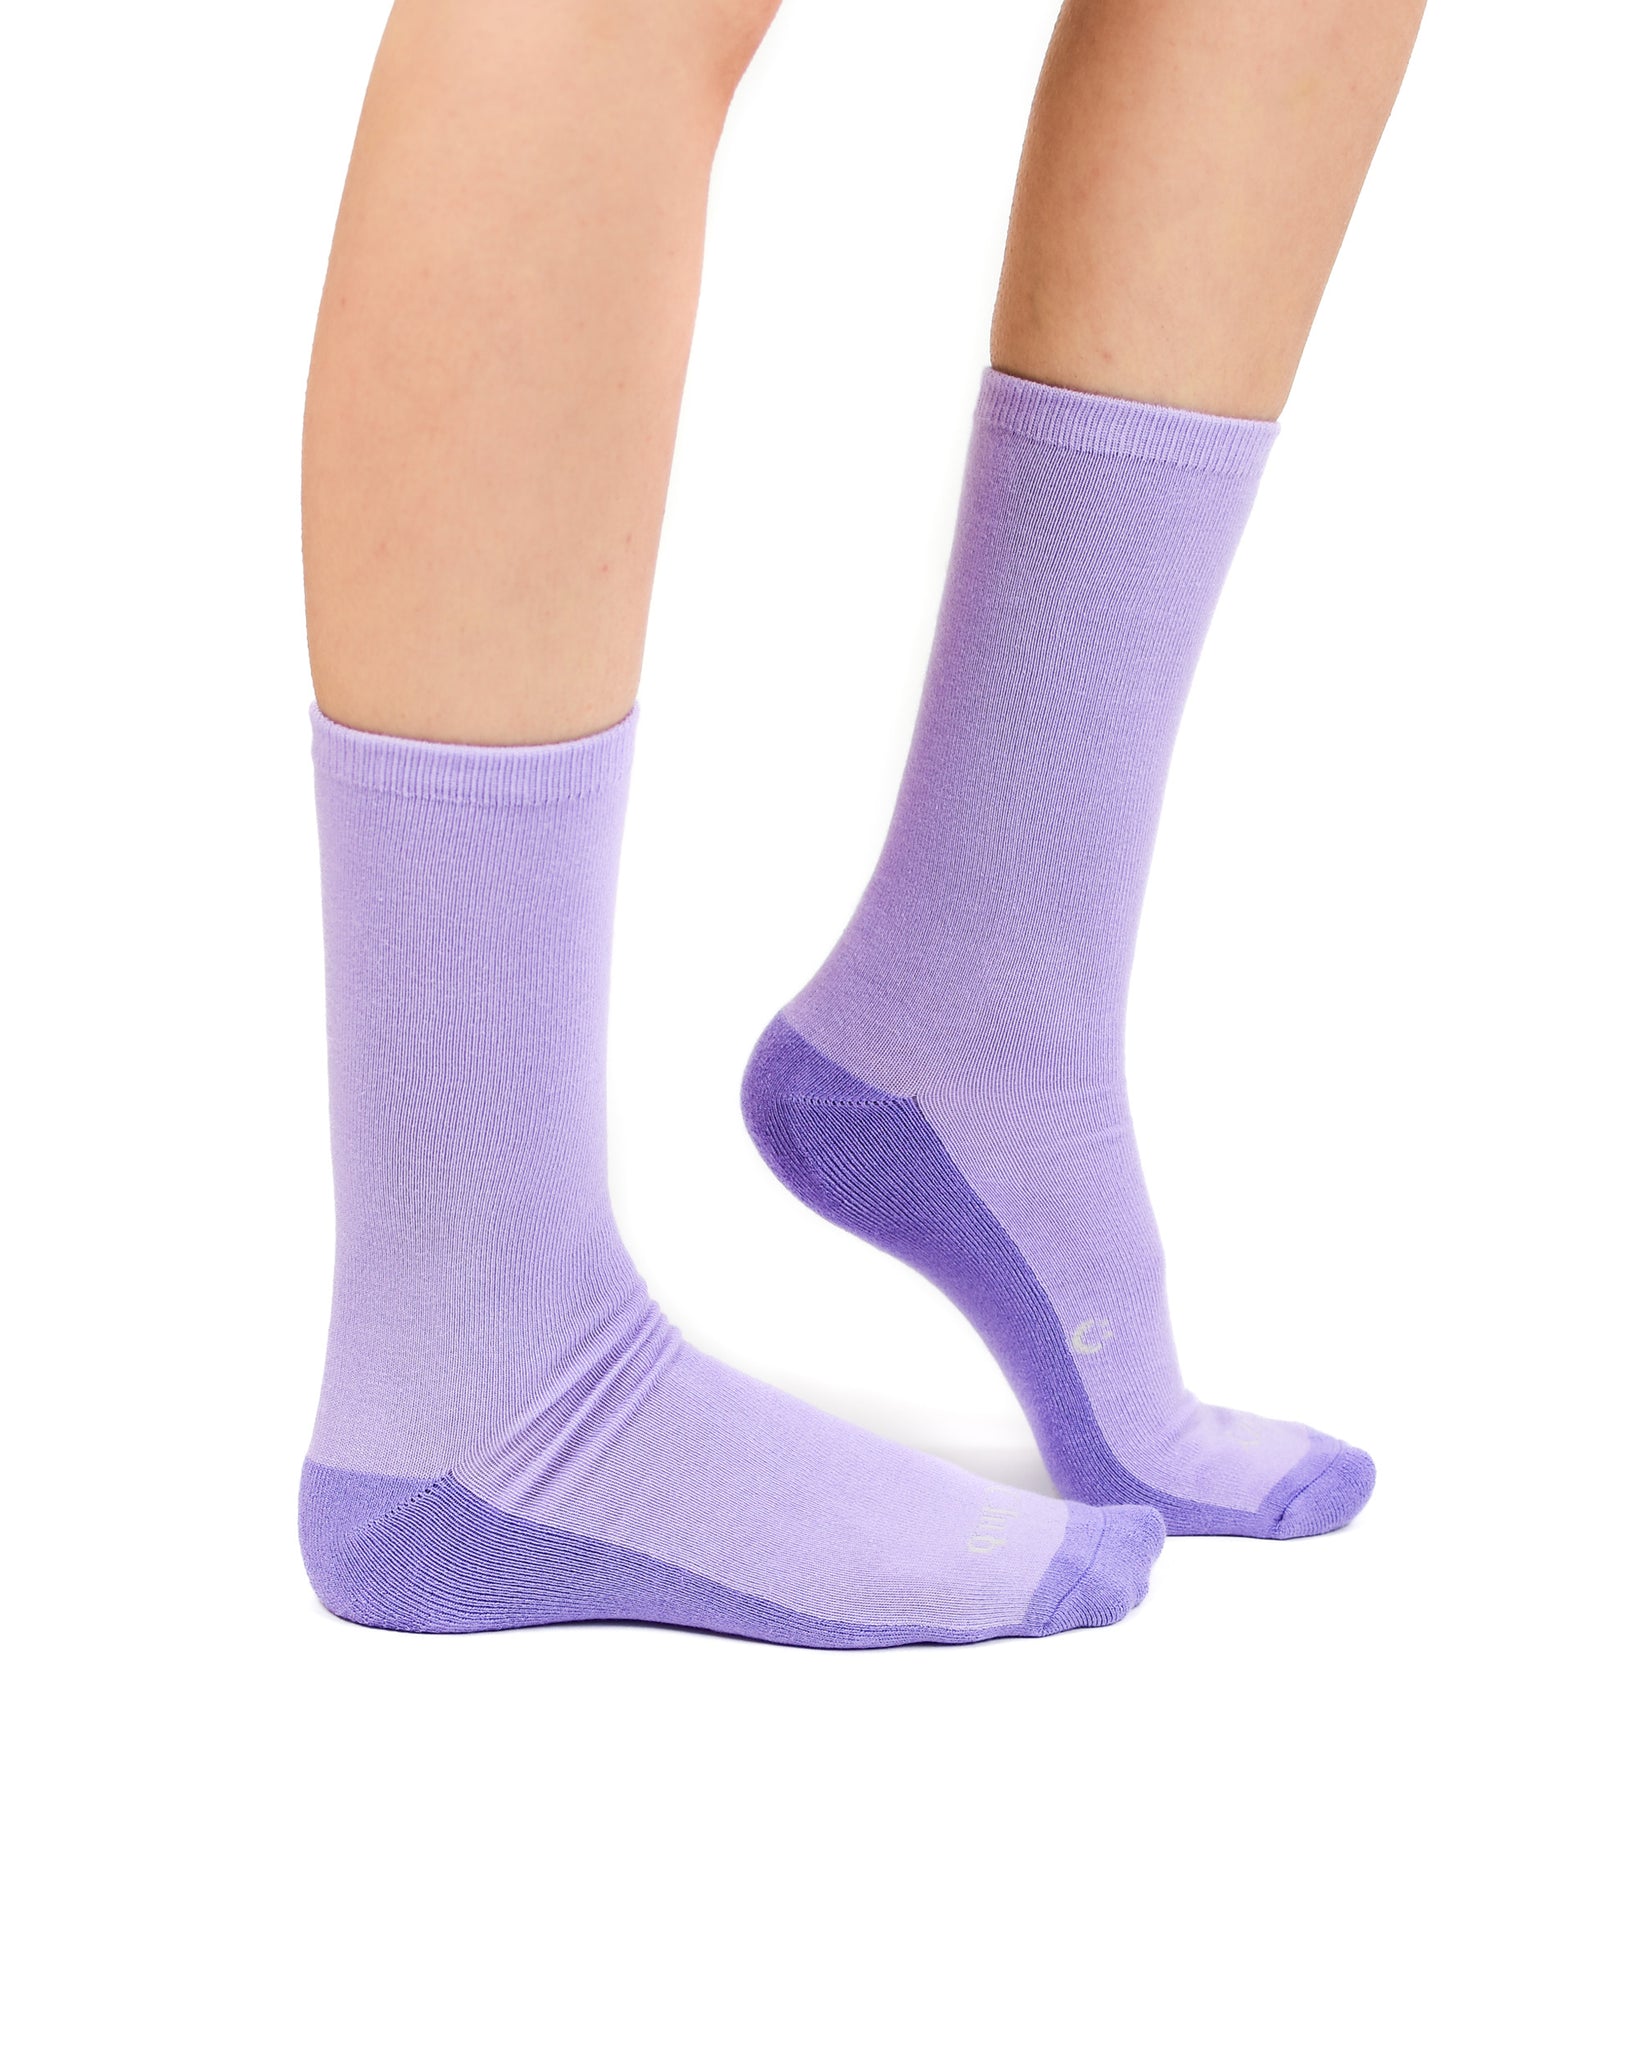 Everyday Crew Seamless Feel Sock 4 Pack (Adults) - Multi